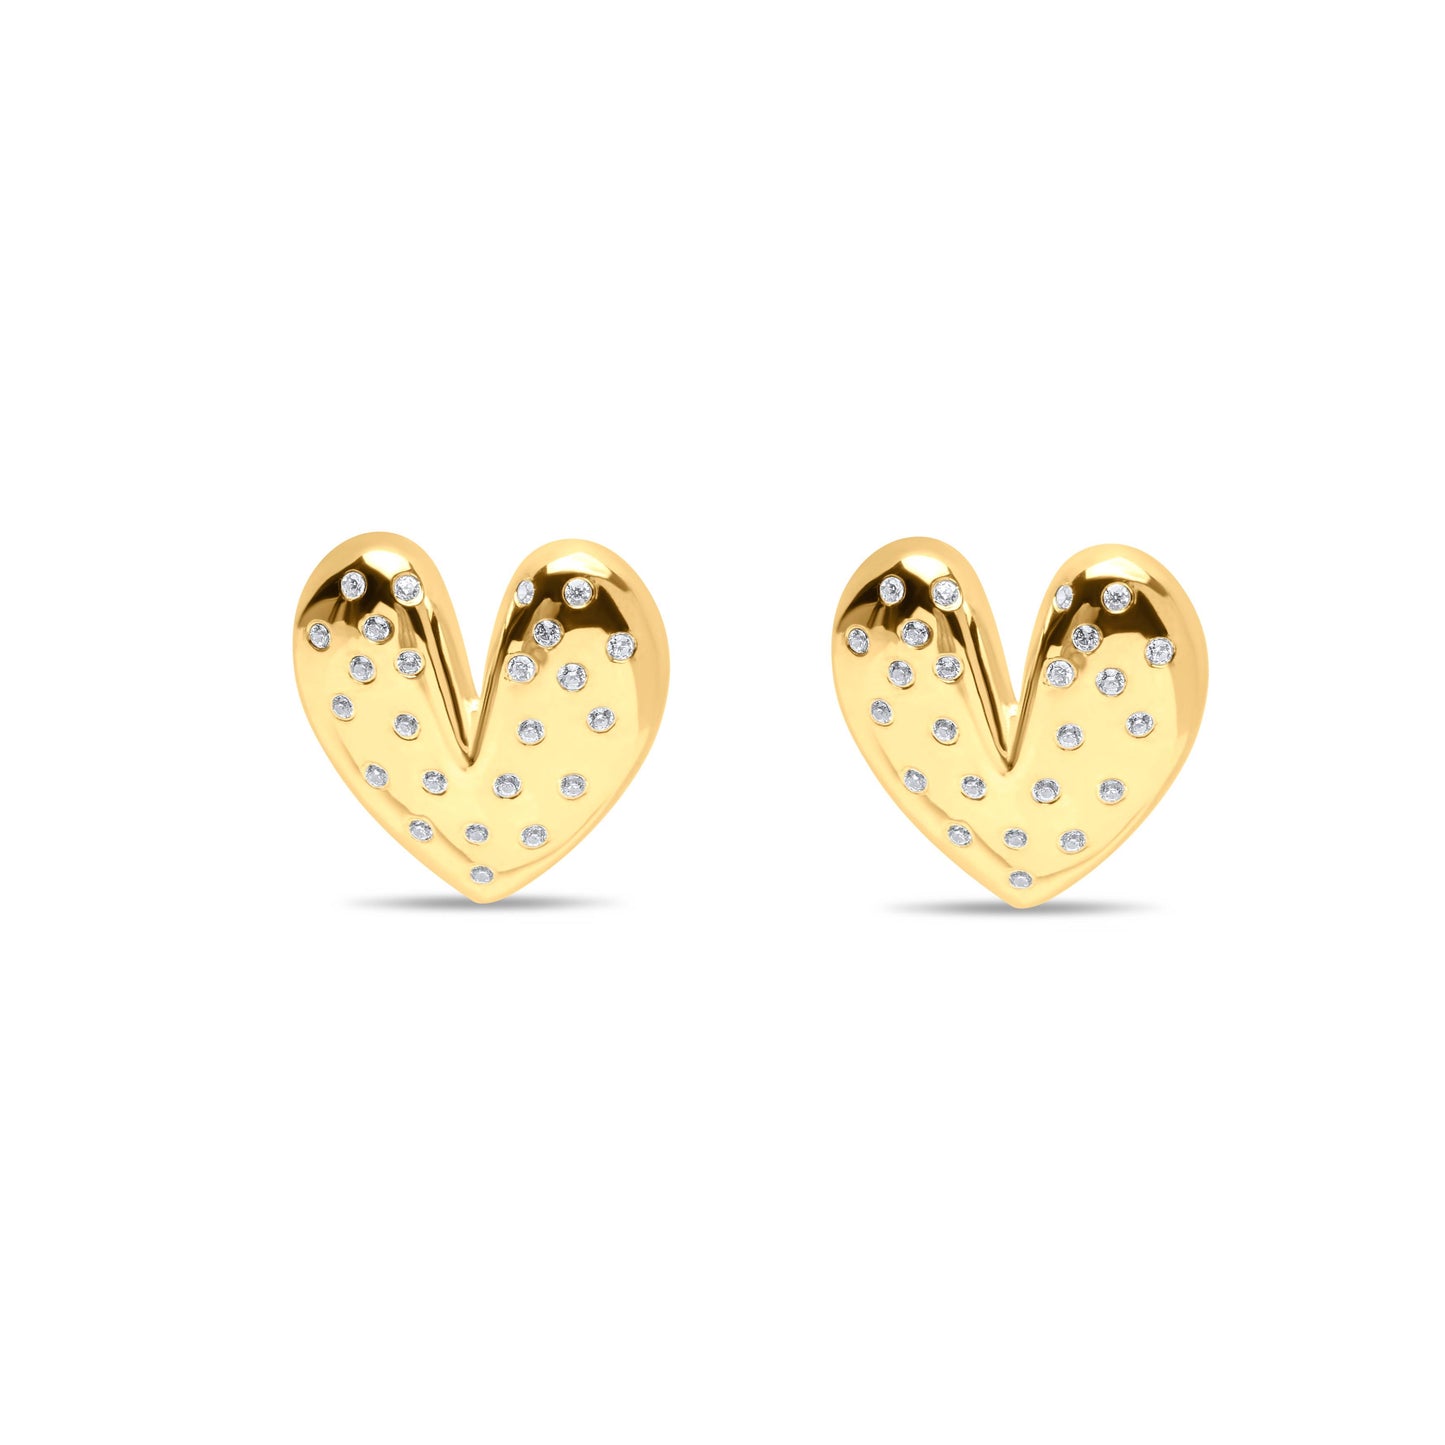 Stardust Hearts Stud Pair Earrings - Gold Plated